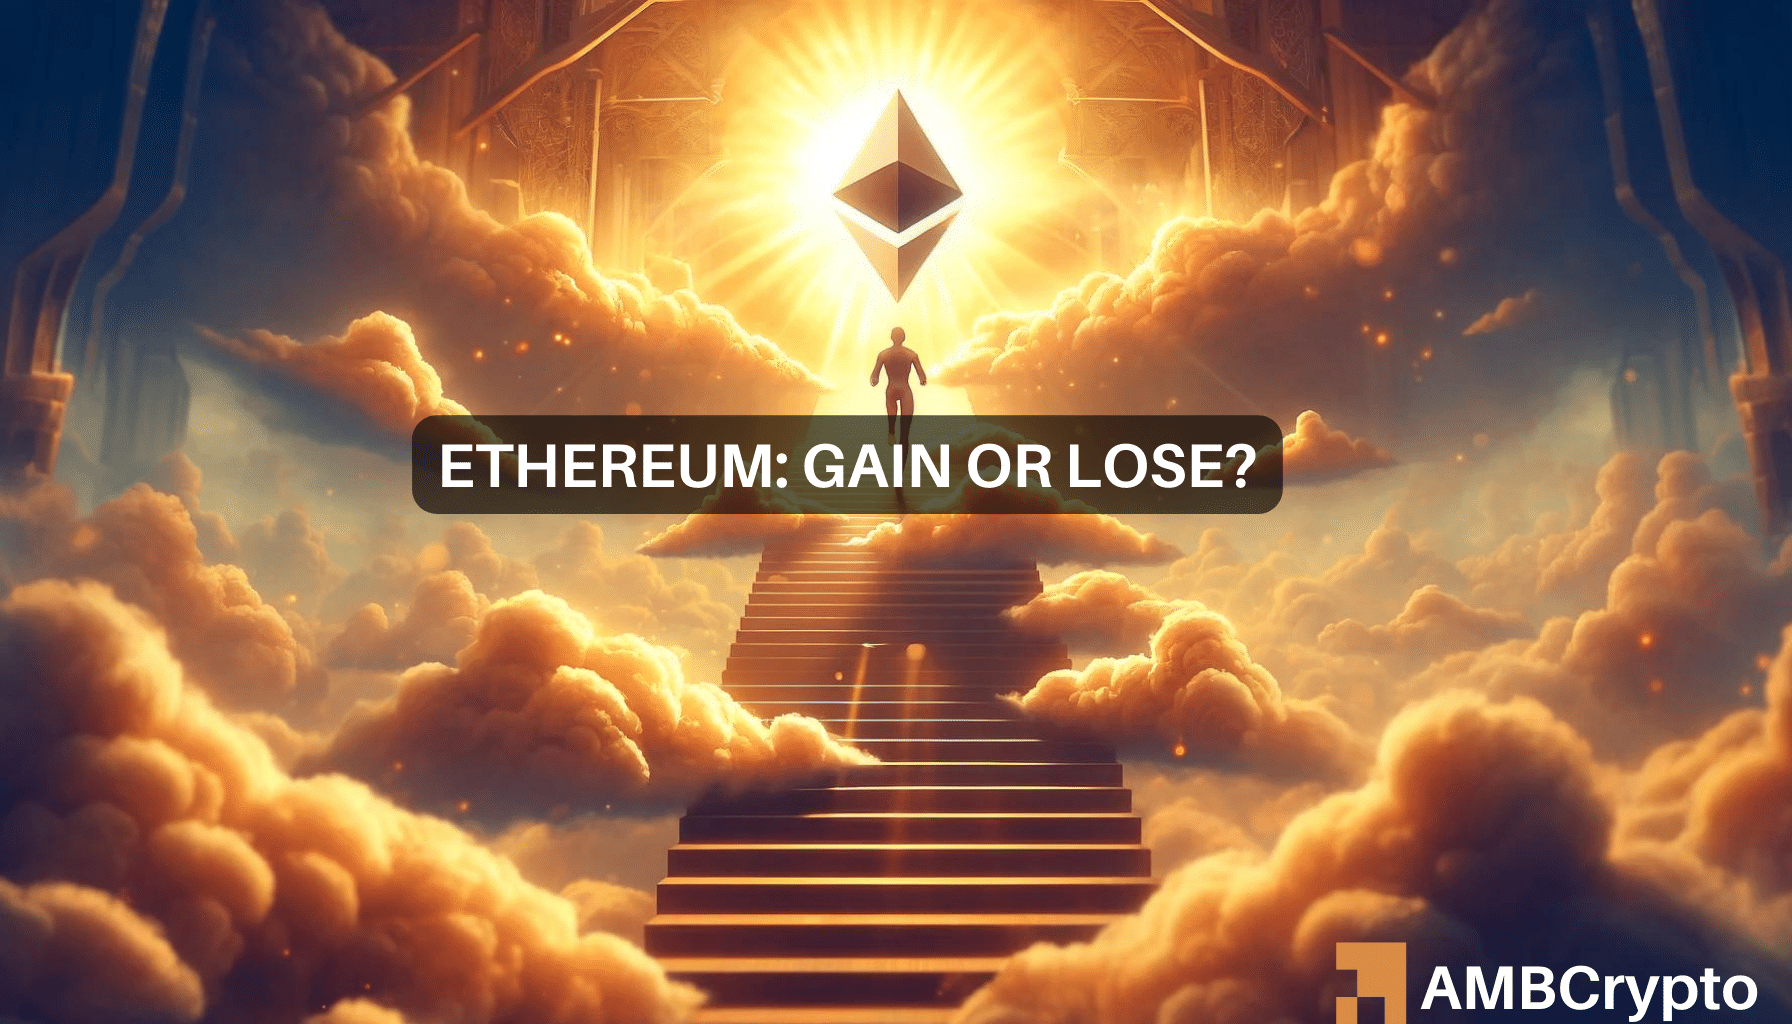 Ethereum price prediction: Buy or sell this summer?